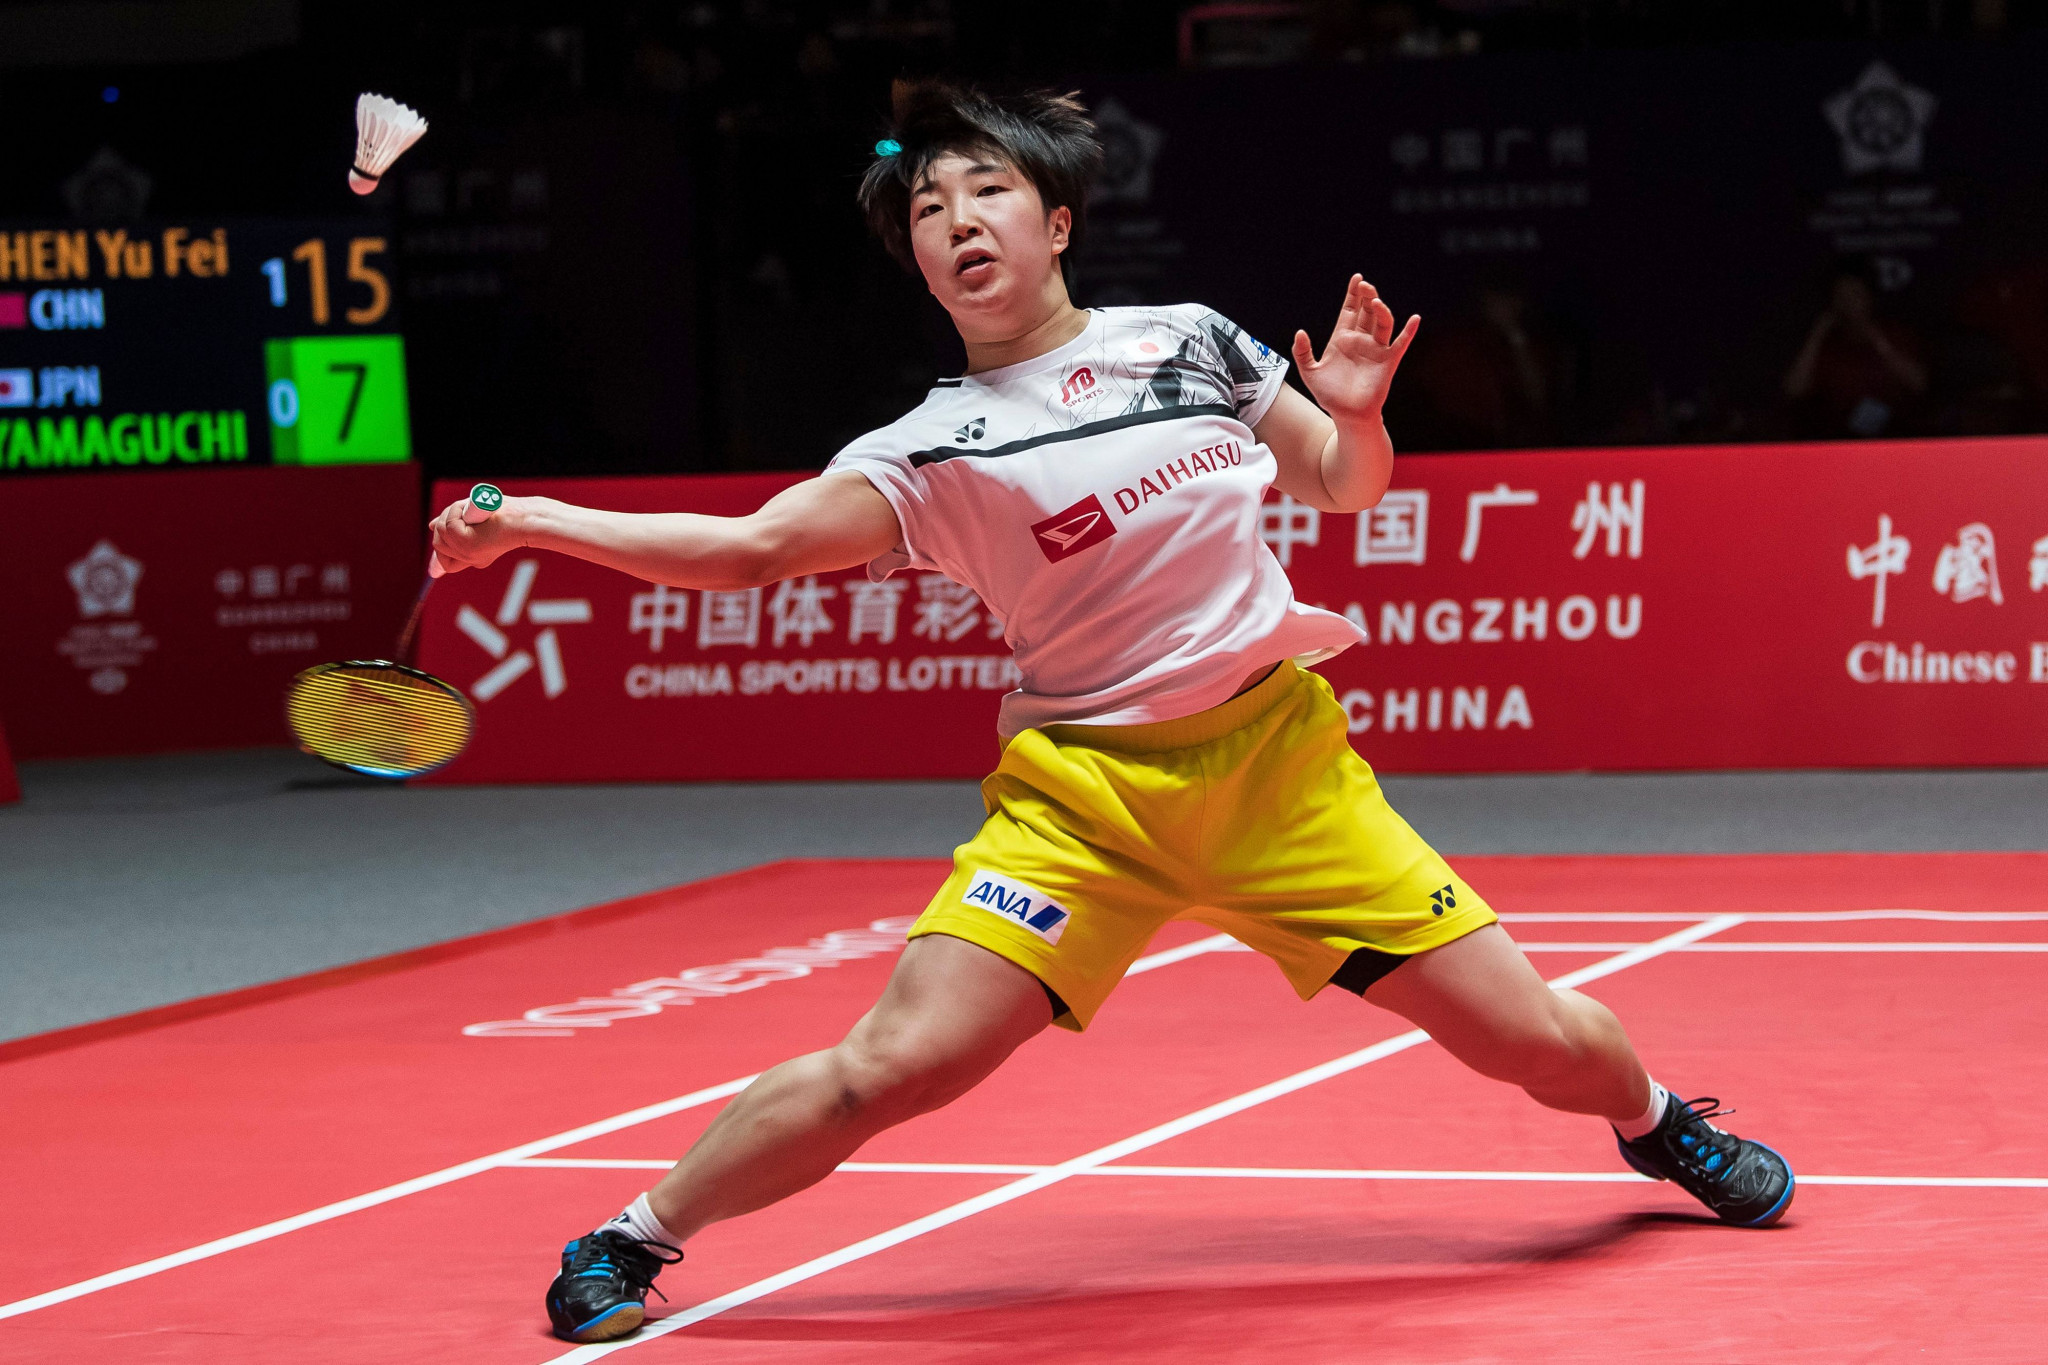 Yamaguchi comes through in thrilling semi-final at BWF Thailand Masters